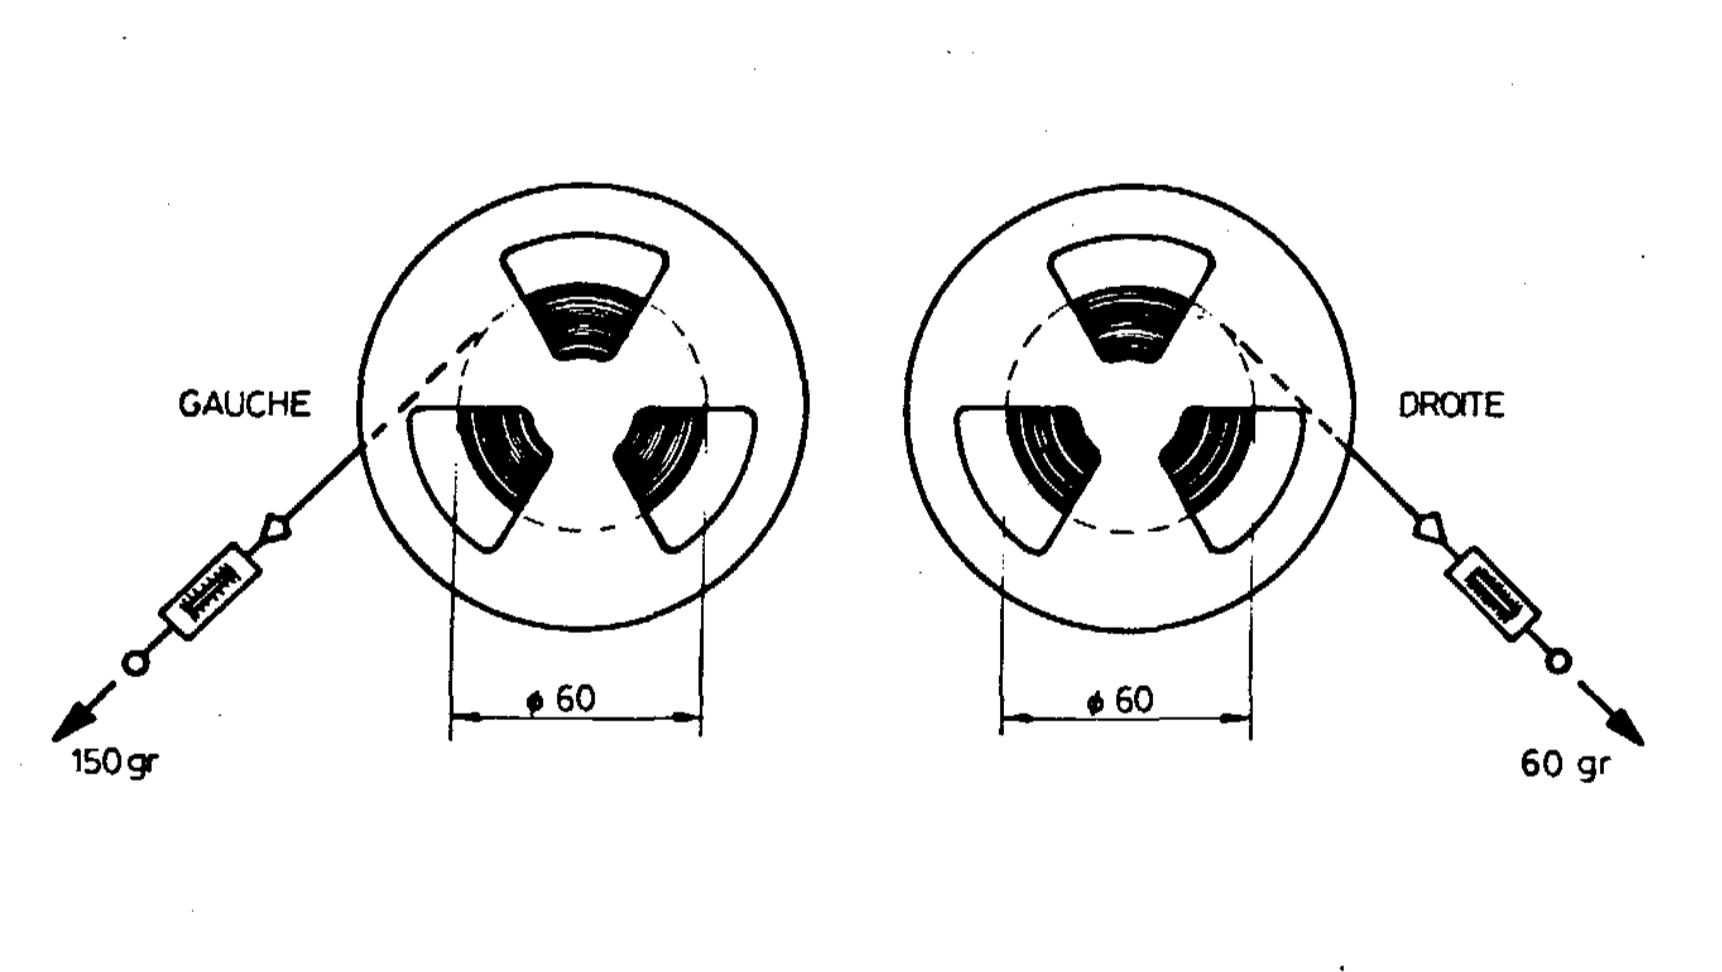 brake action of the completed winding assemblies (GAUCHE/Left) (DROITE/Right)